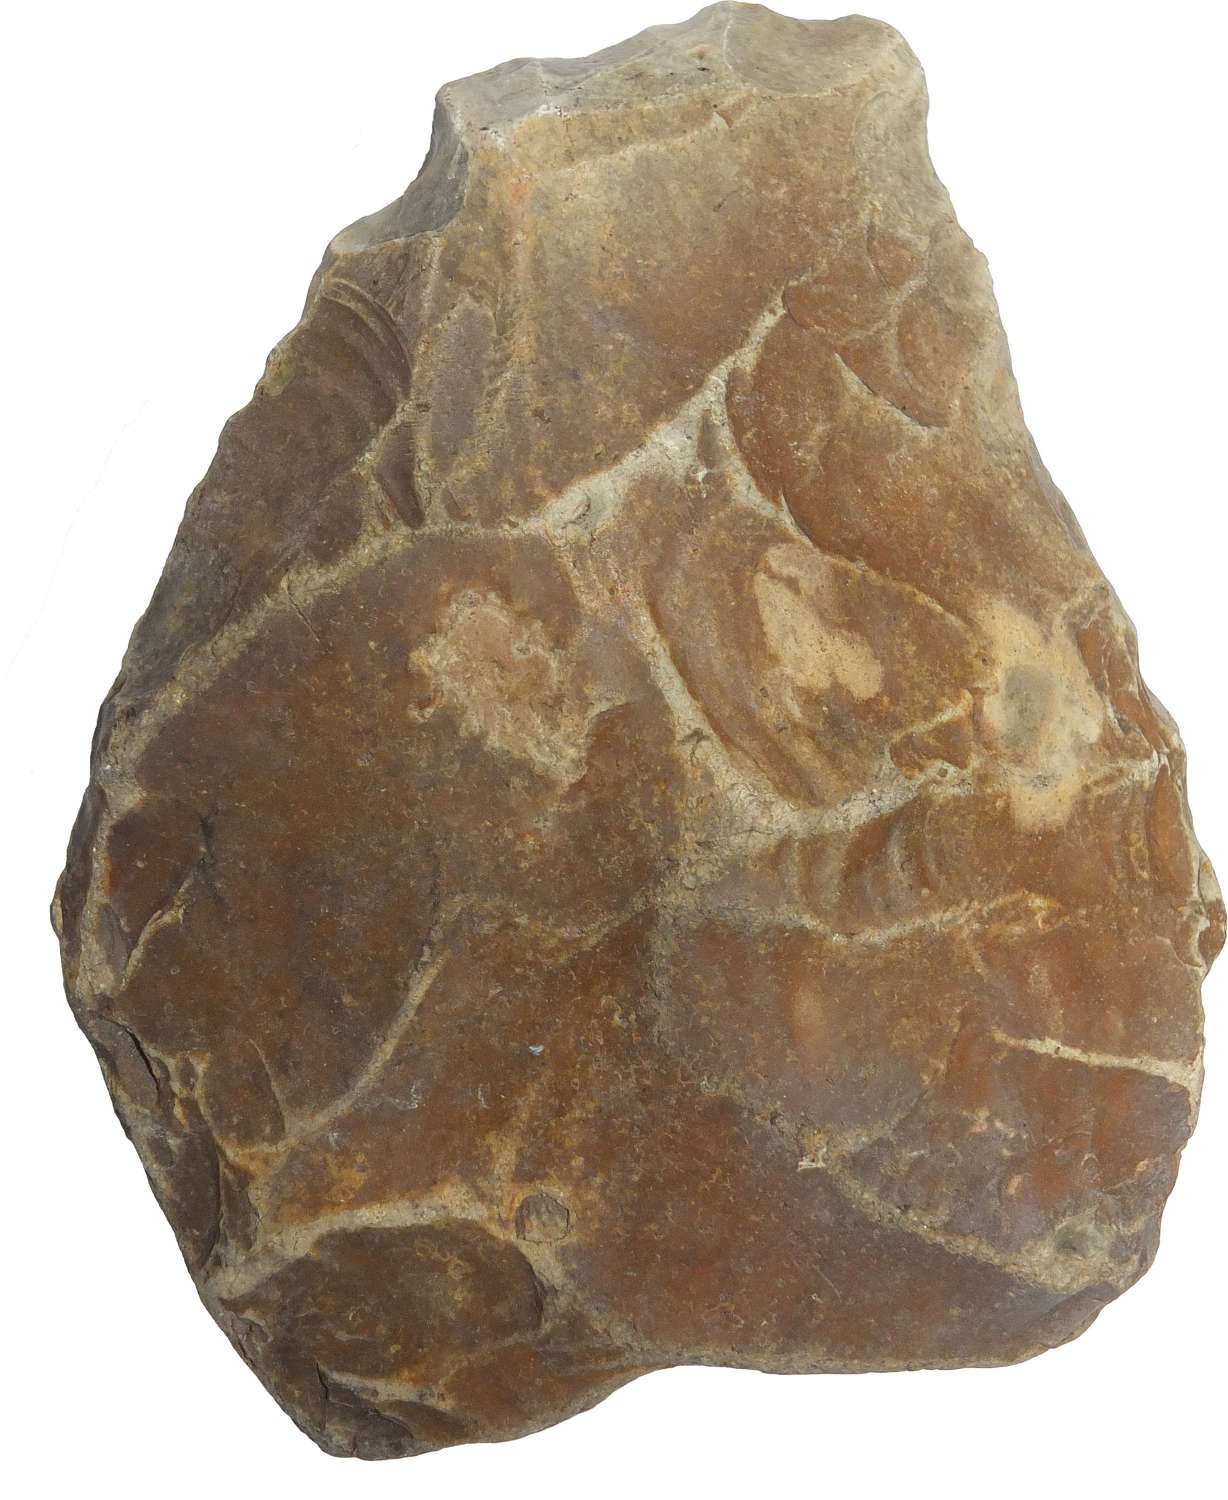 A Lower Palaeolithic Acheulian flint cleaver found in 1925